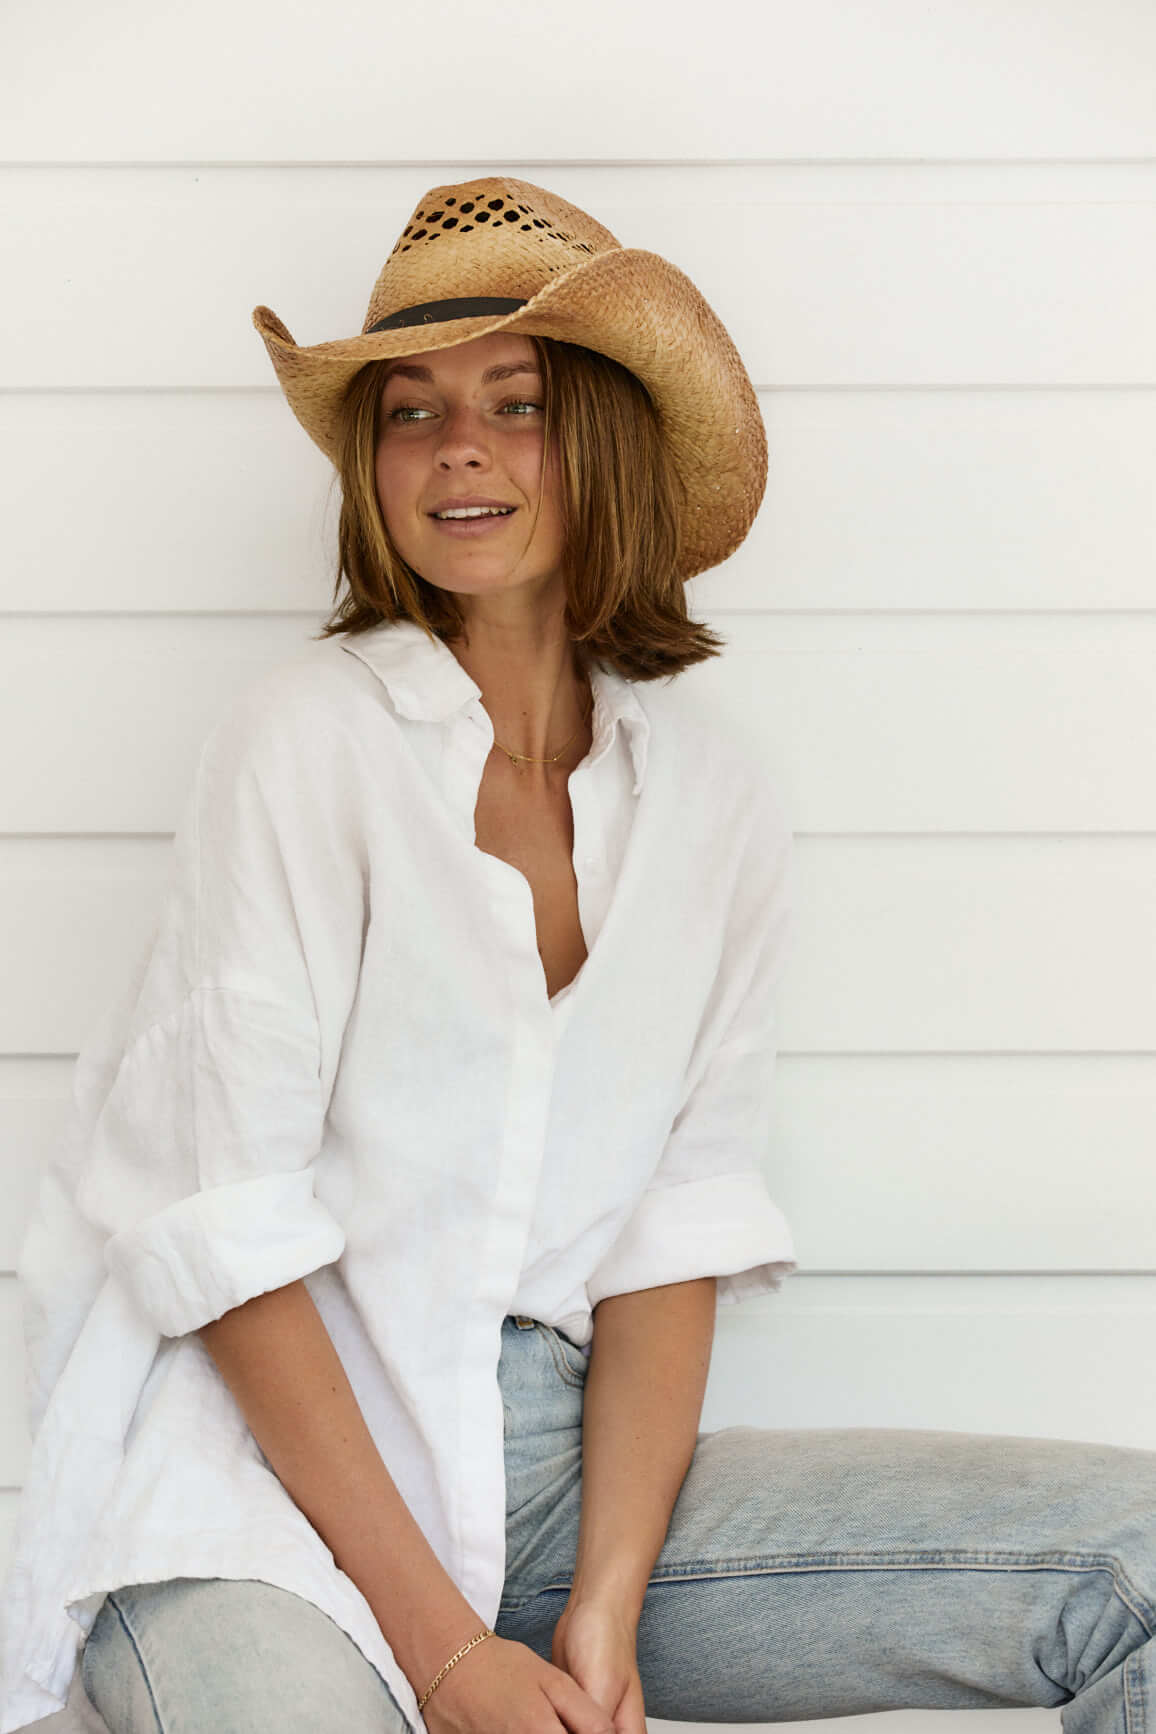 Woman in White shirt wearing western straw hat with vented crown and route 66 logo on vegan hat band